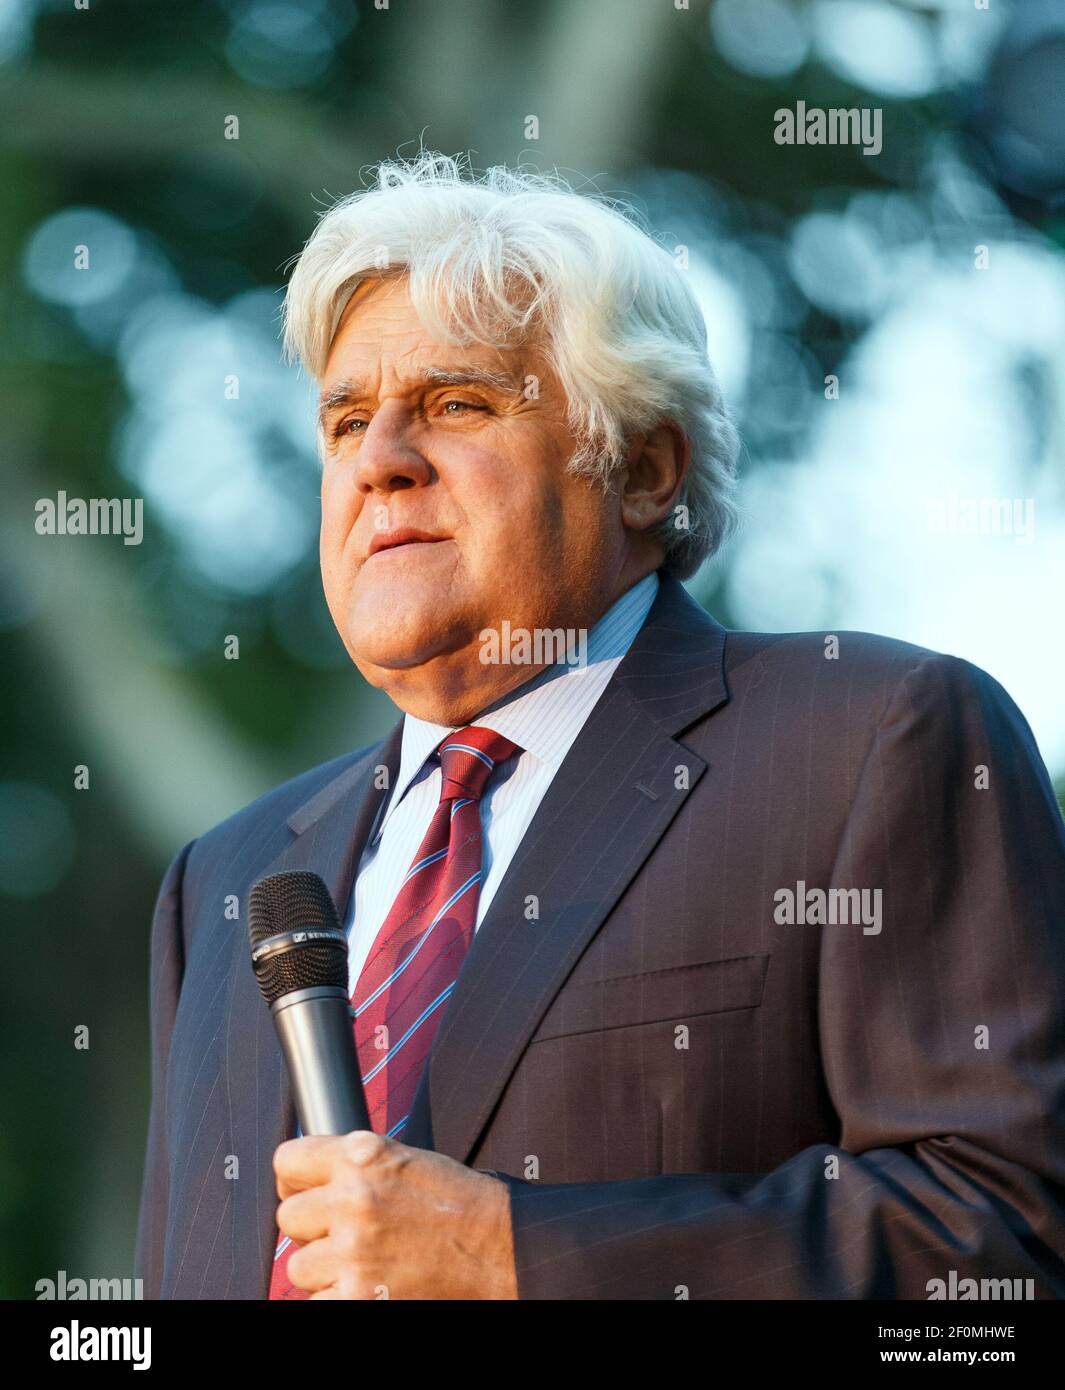 SAN FRANCISCO, CA - May 12 - Jay Leno attends LymeAid 2018 on May 12th 2018 at Private Residence in Portola Valley, CA on May 12, 2018 (Photo - Drew Altizer/Sipa USA) Stock Photo